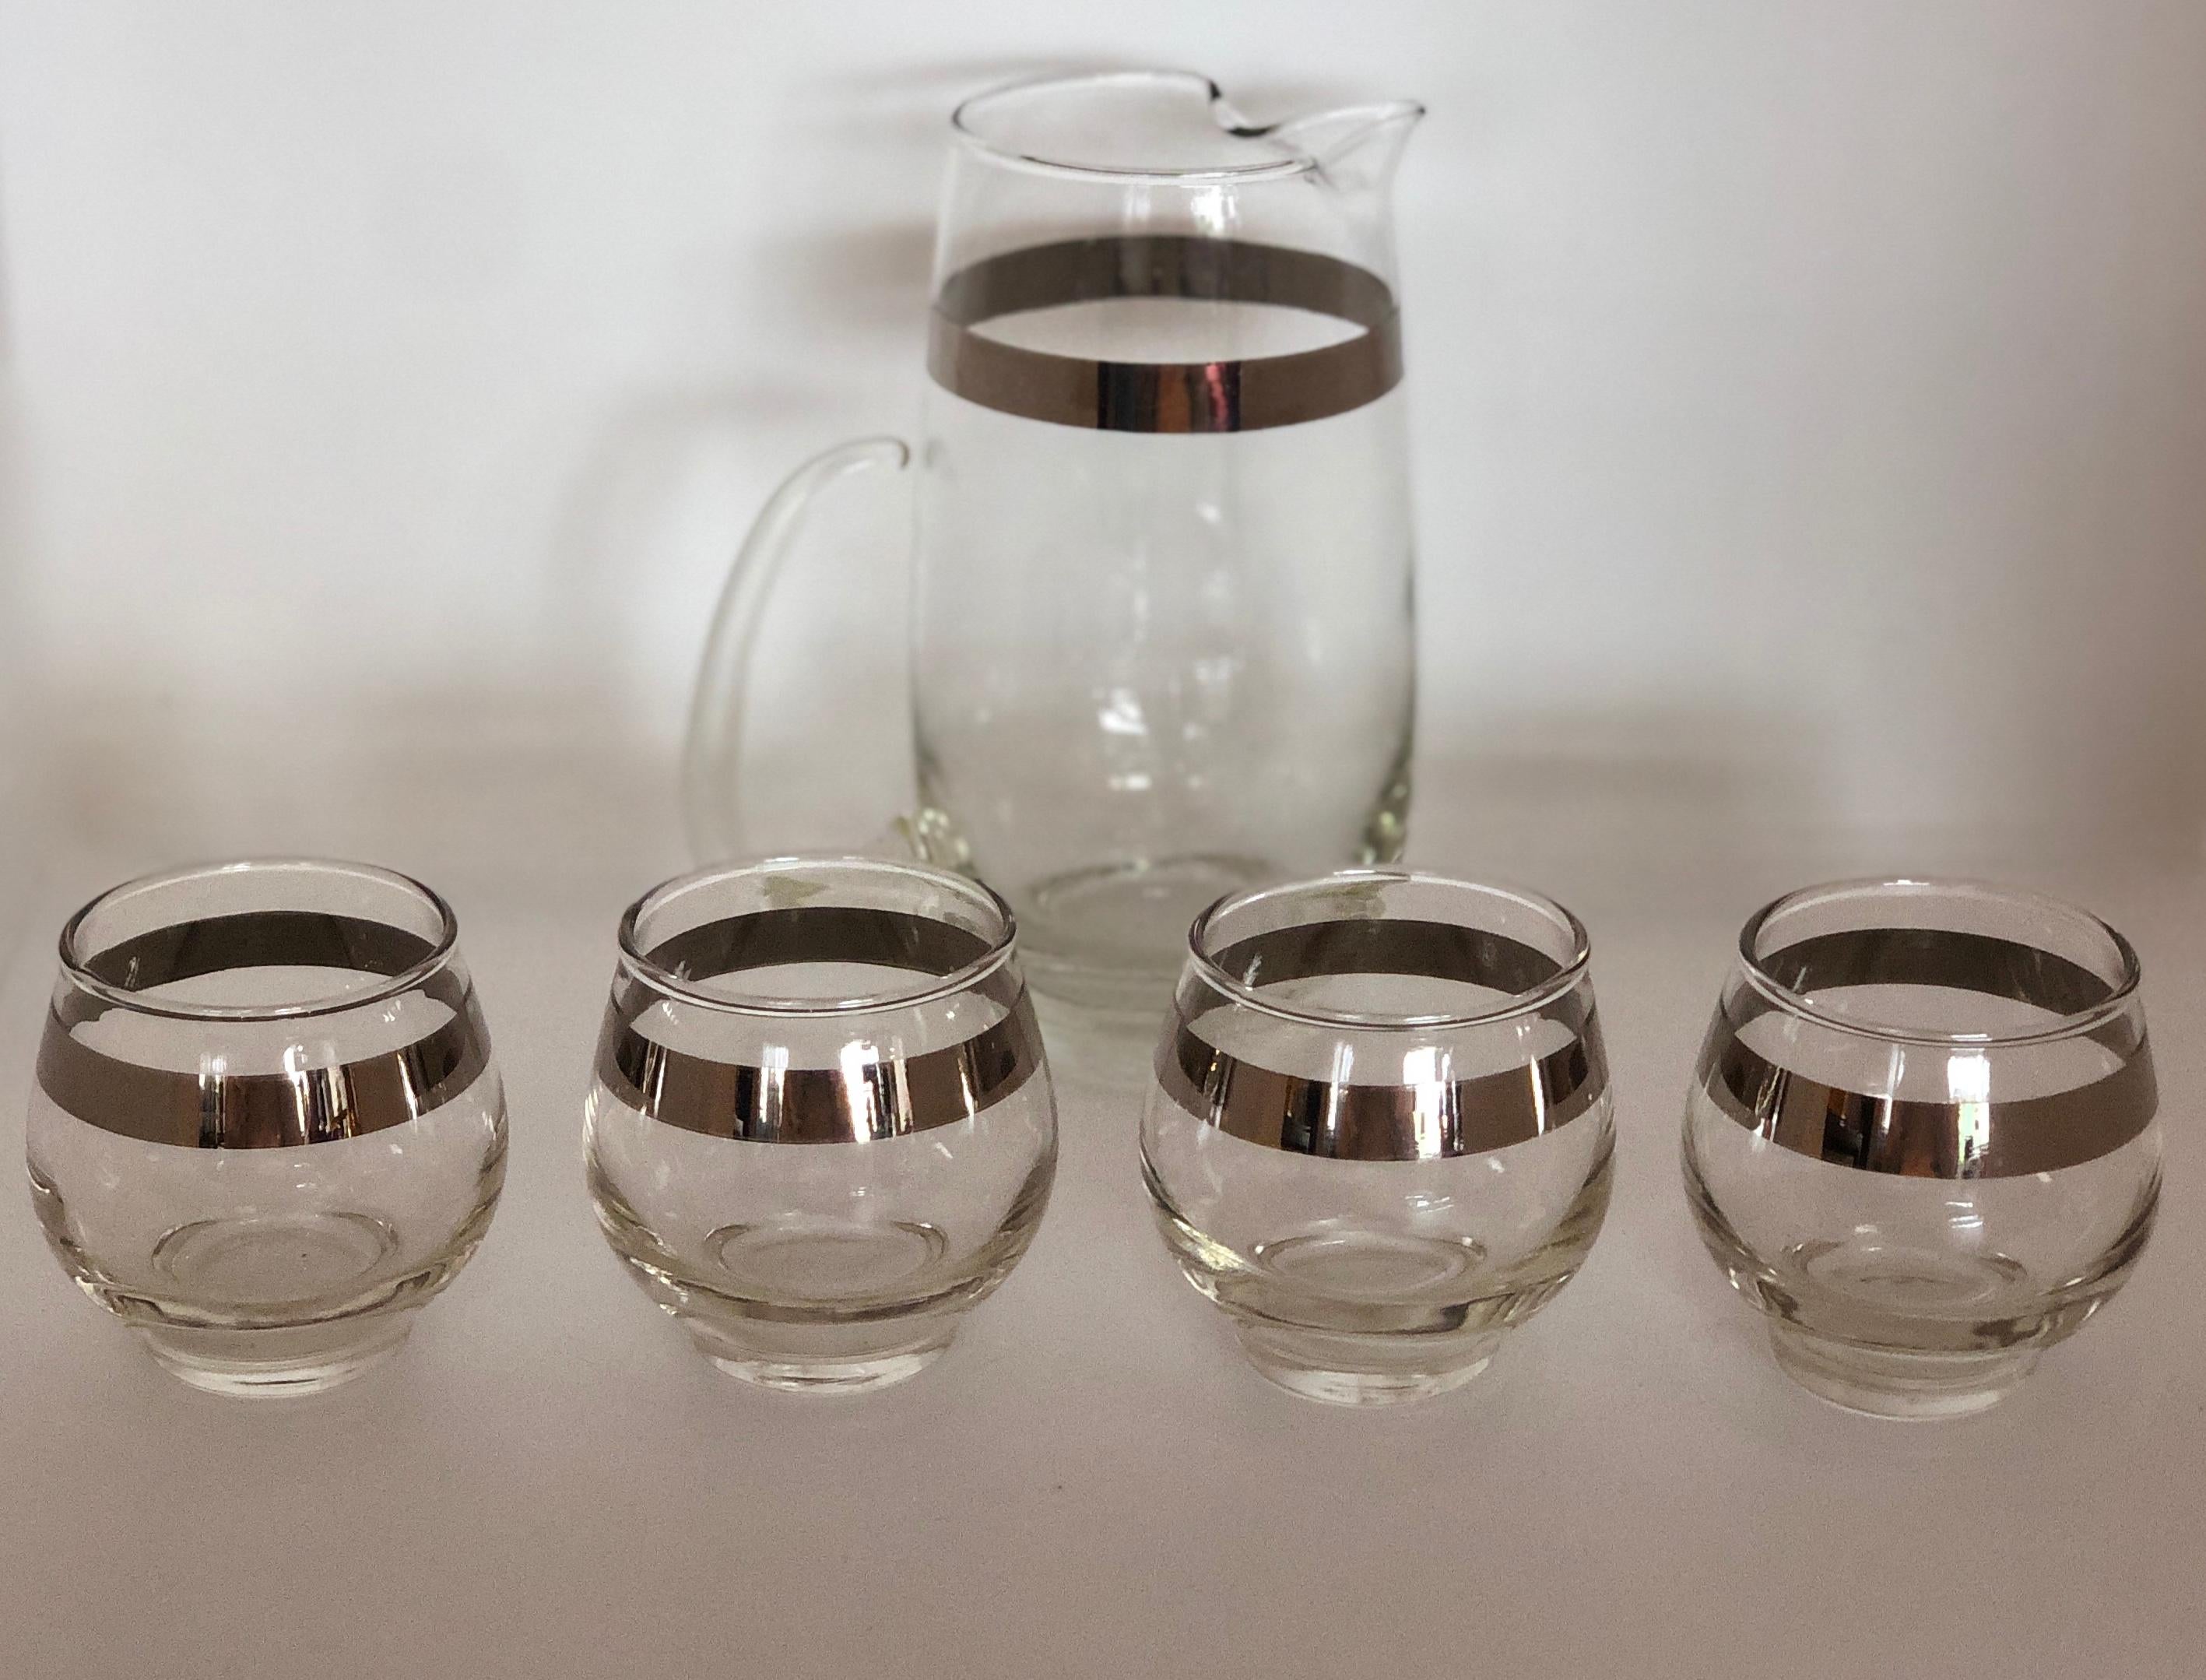 Offered is a set of five Mid-Century Modern 